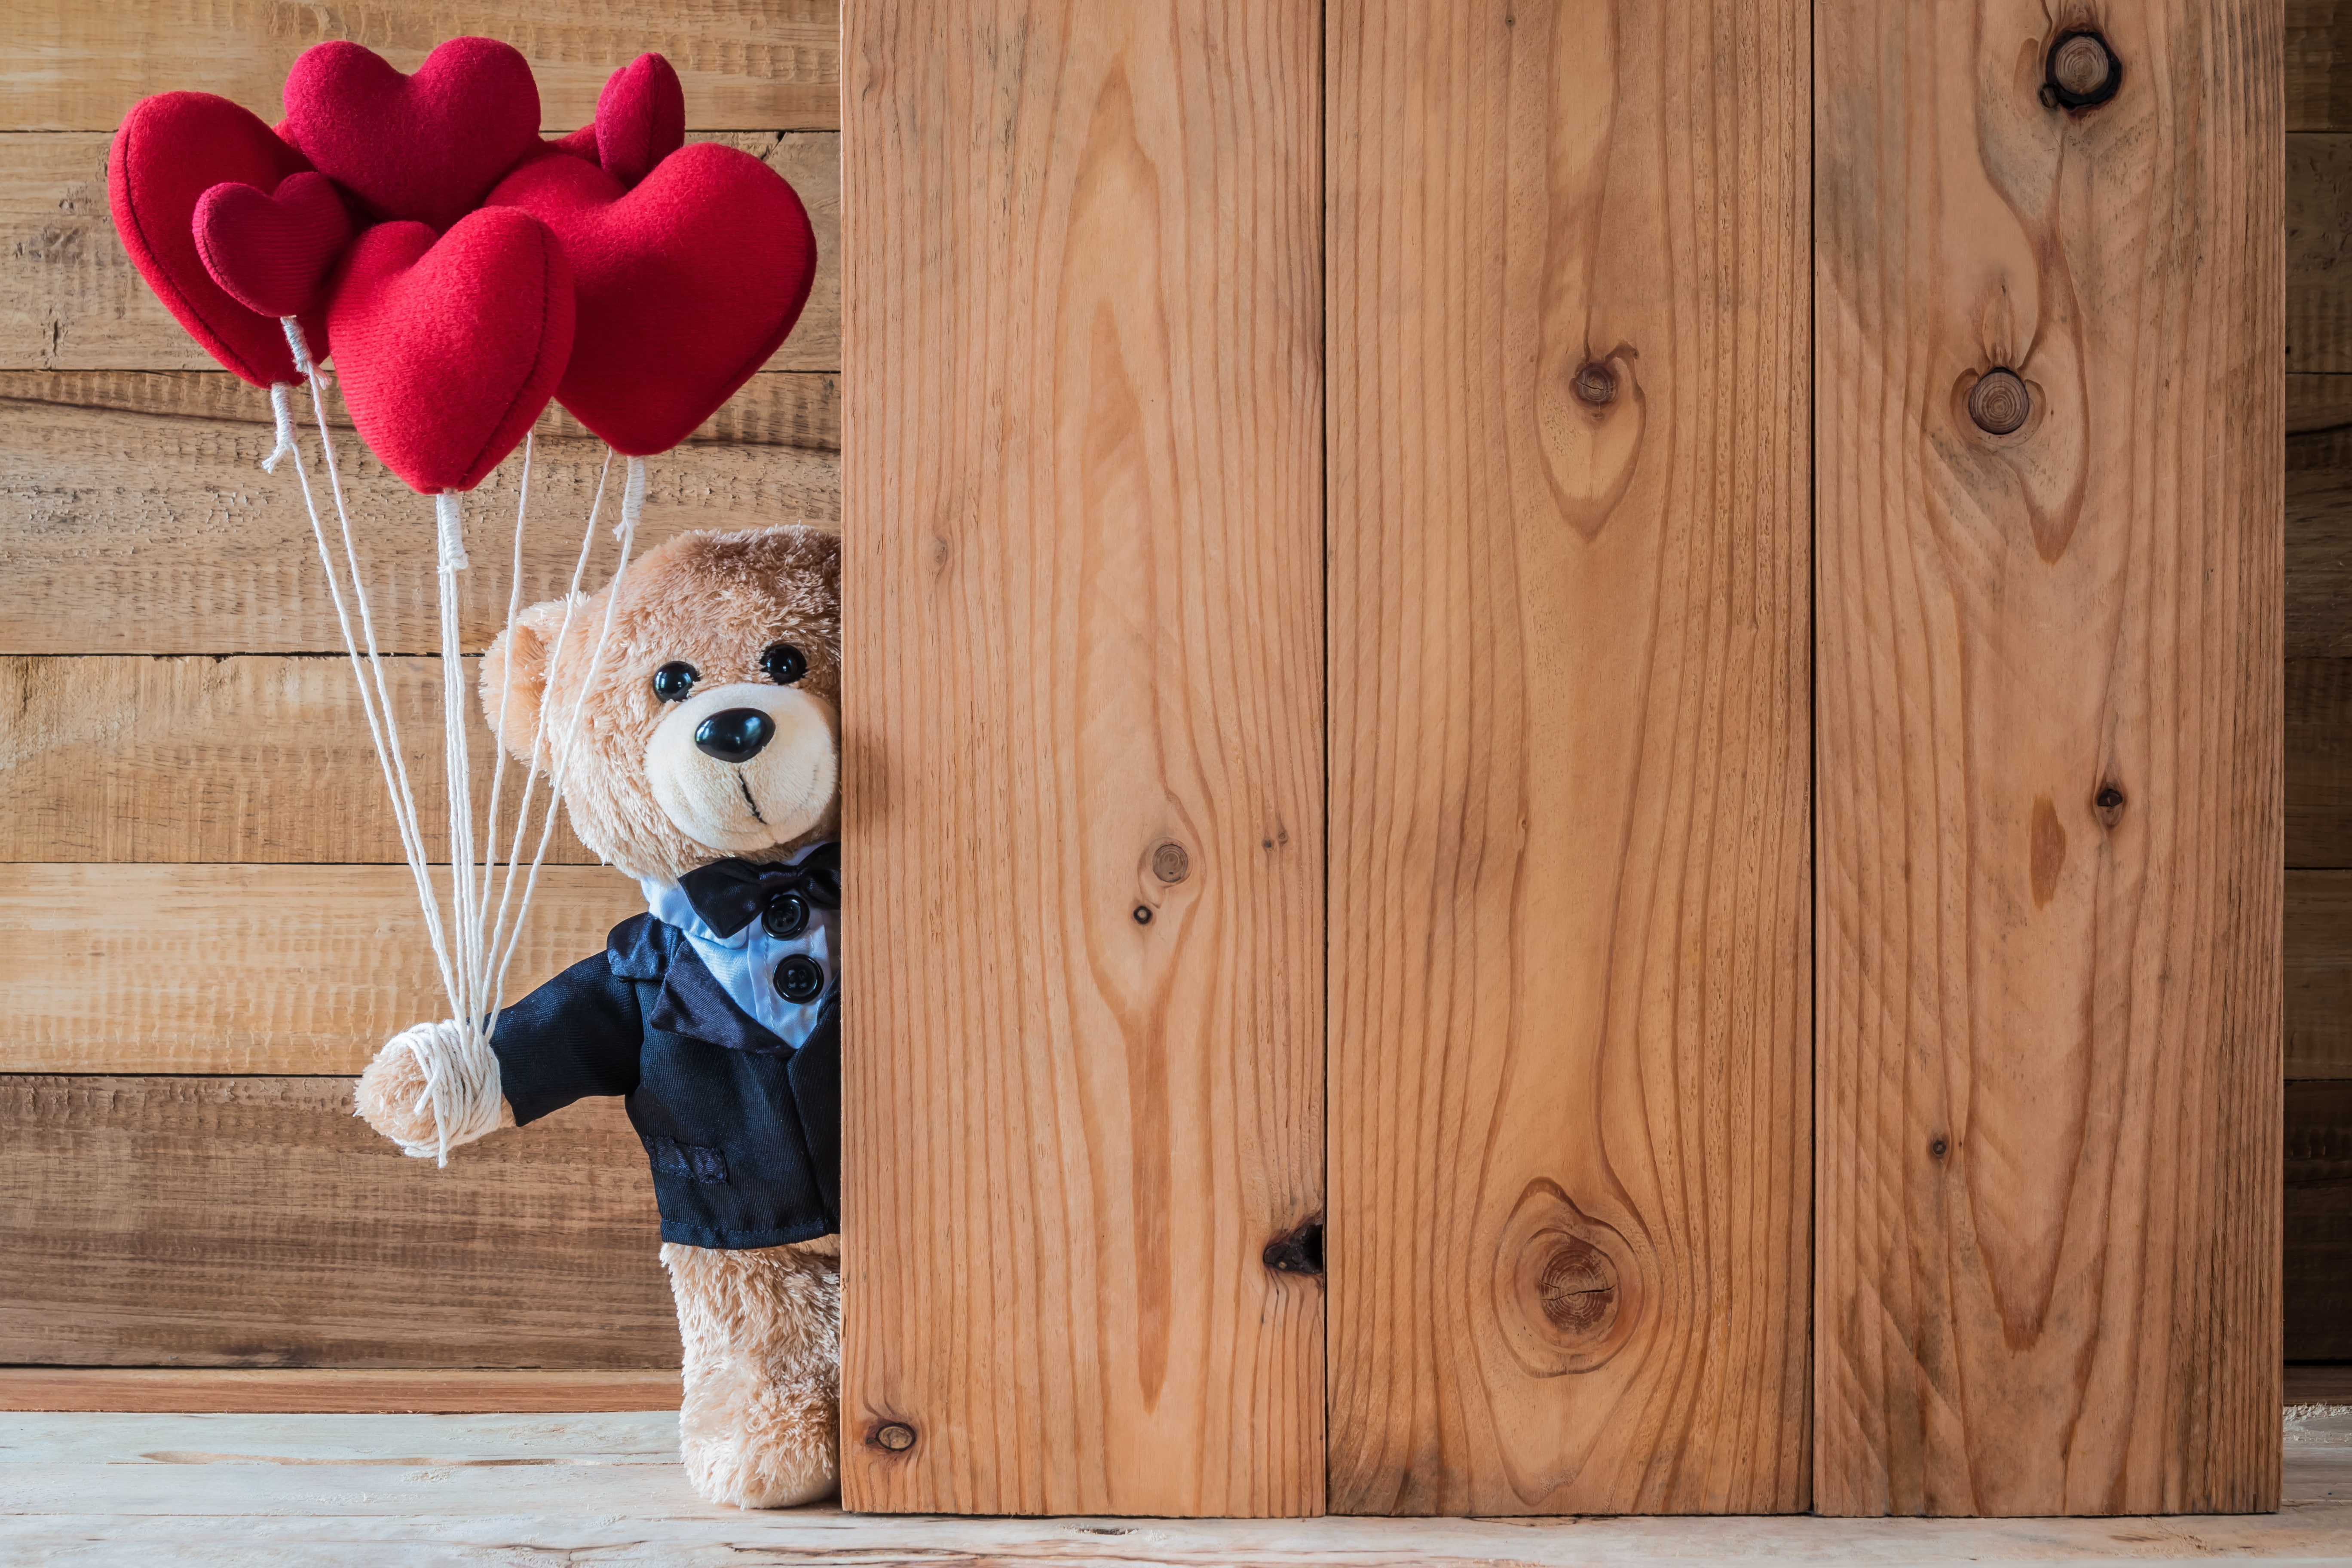 Teddy Bear Holding Balloons, gift, romantic, cute, valentines day